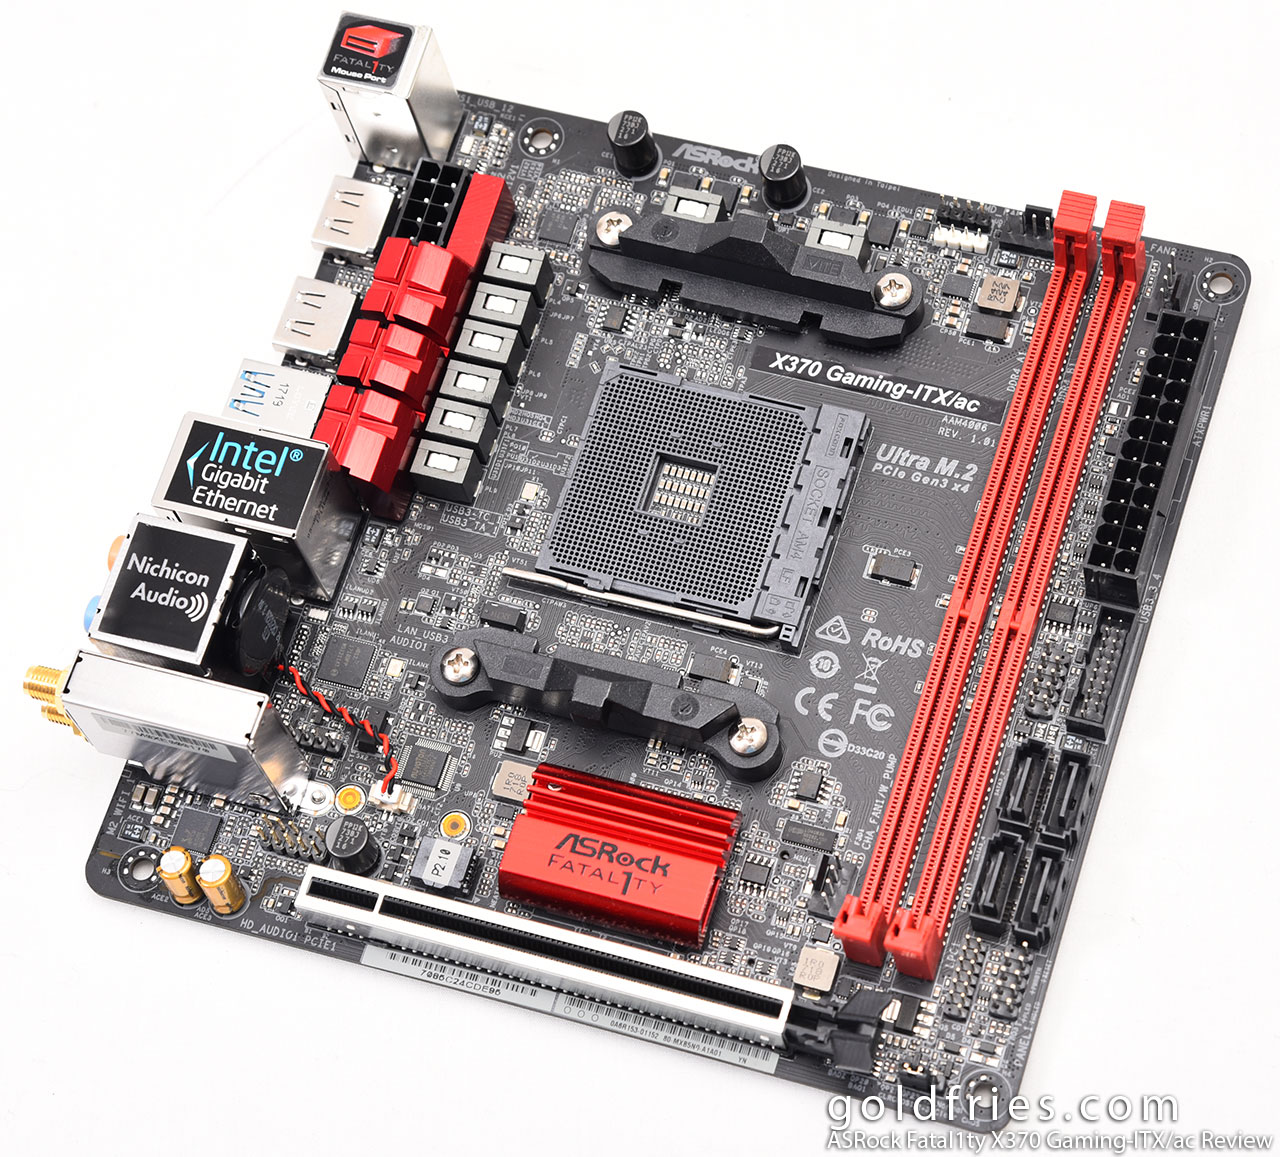 ASRock Fatal1ty X370 Gaming-ITX/ac Review